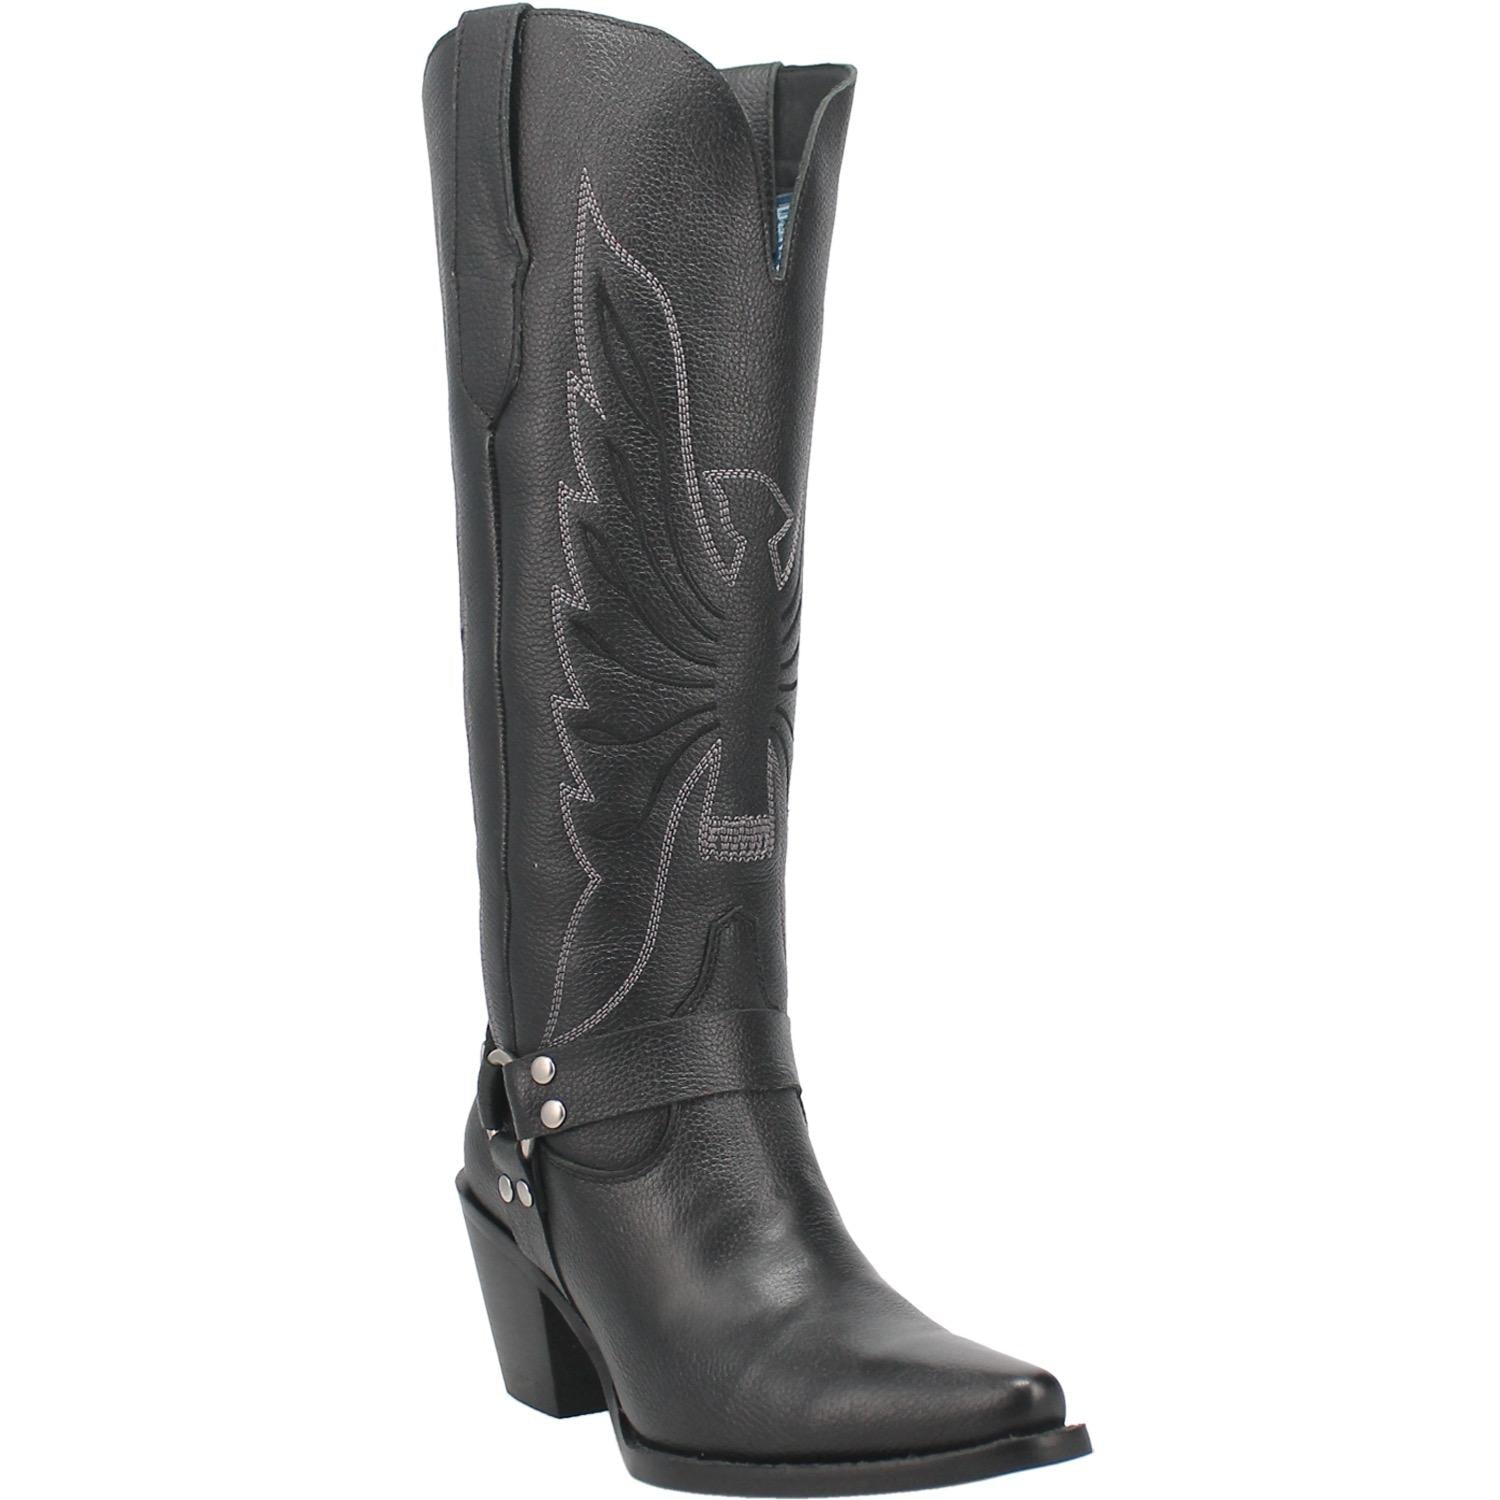 Heavens To Betsy Thunderbird Embroidered Black Leather Harness Knee High Boots (DS)